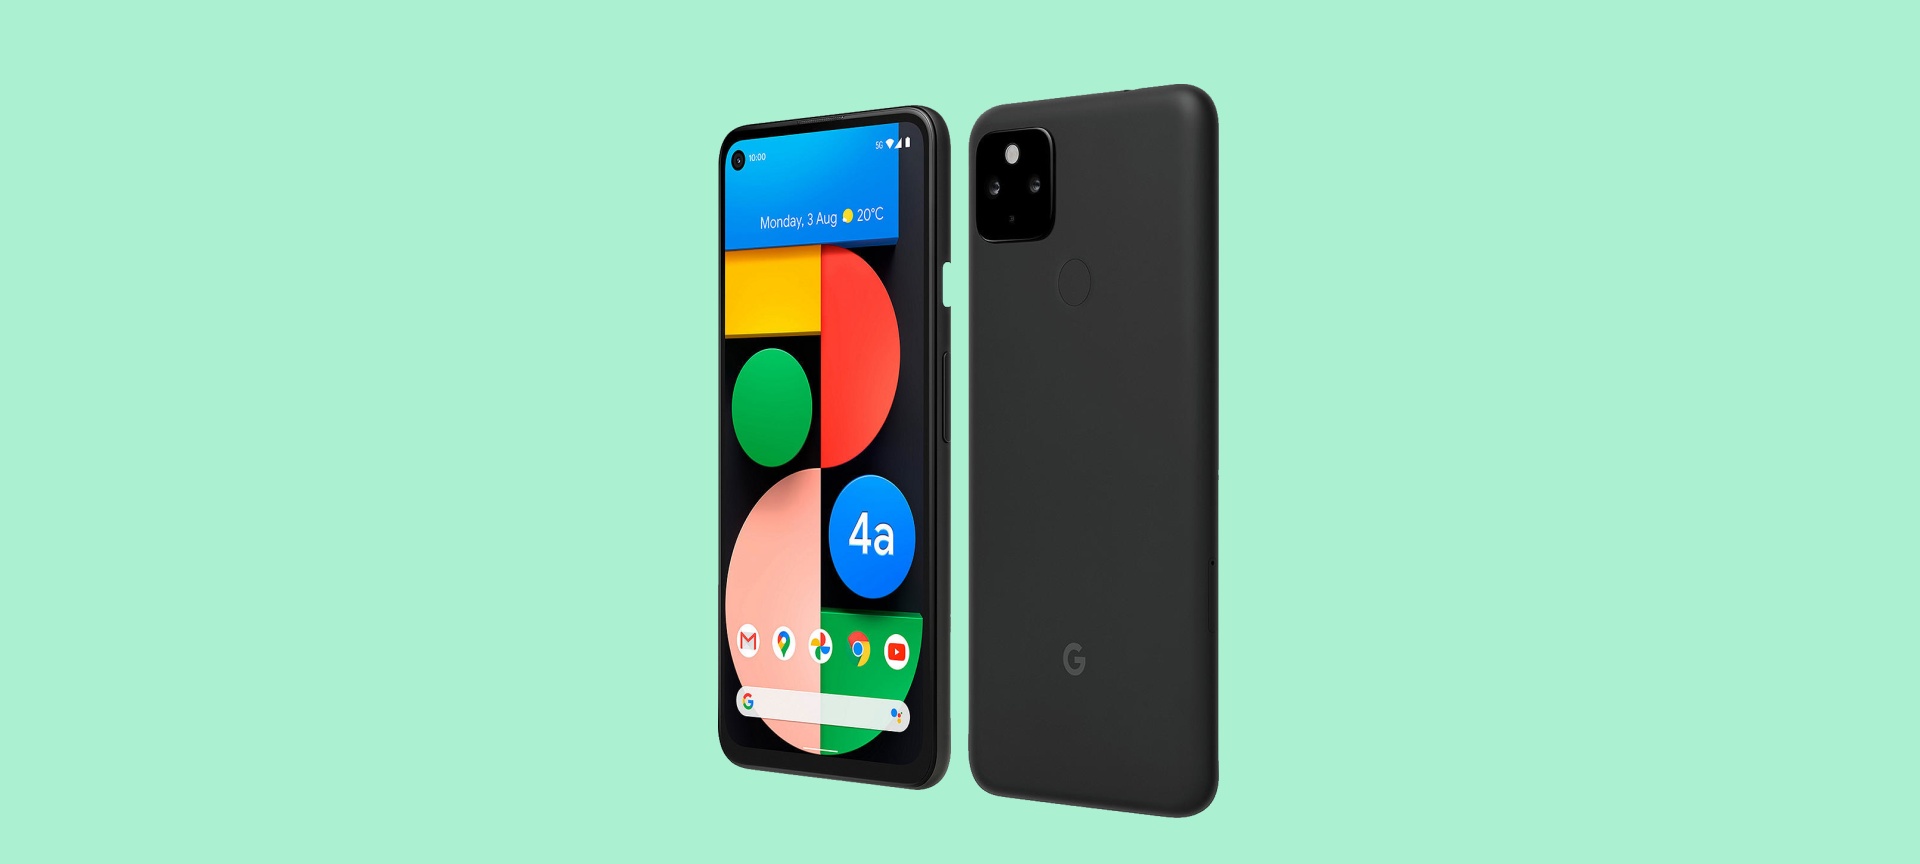 Google Pixel 4a 5G official versions appear with full specifications